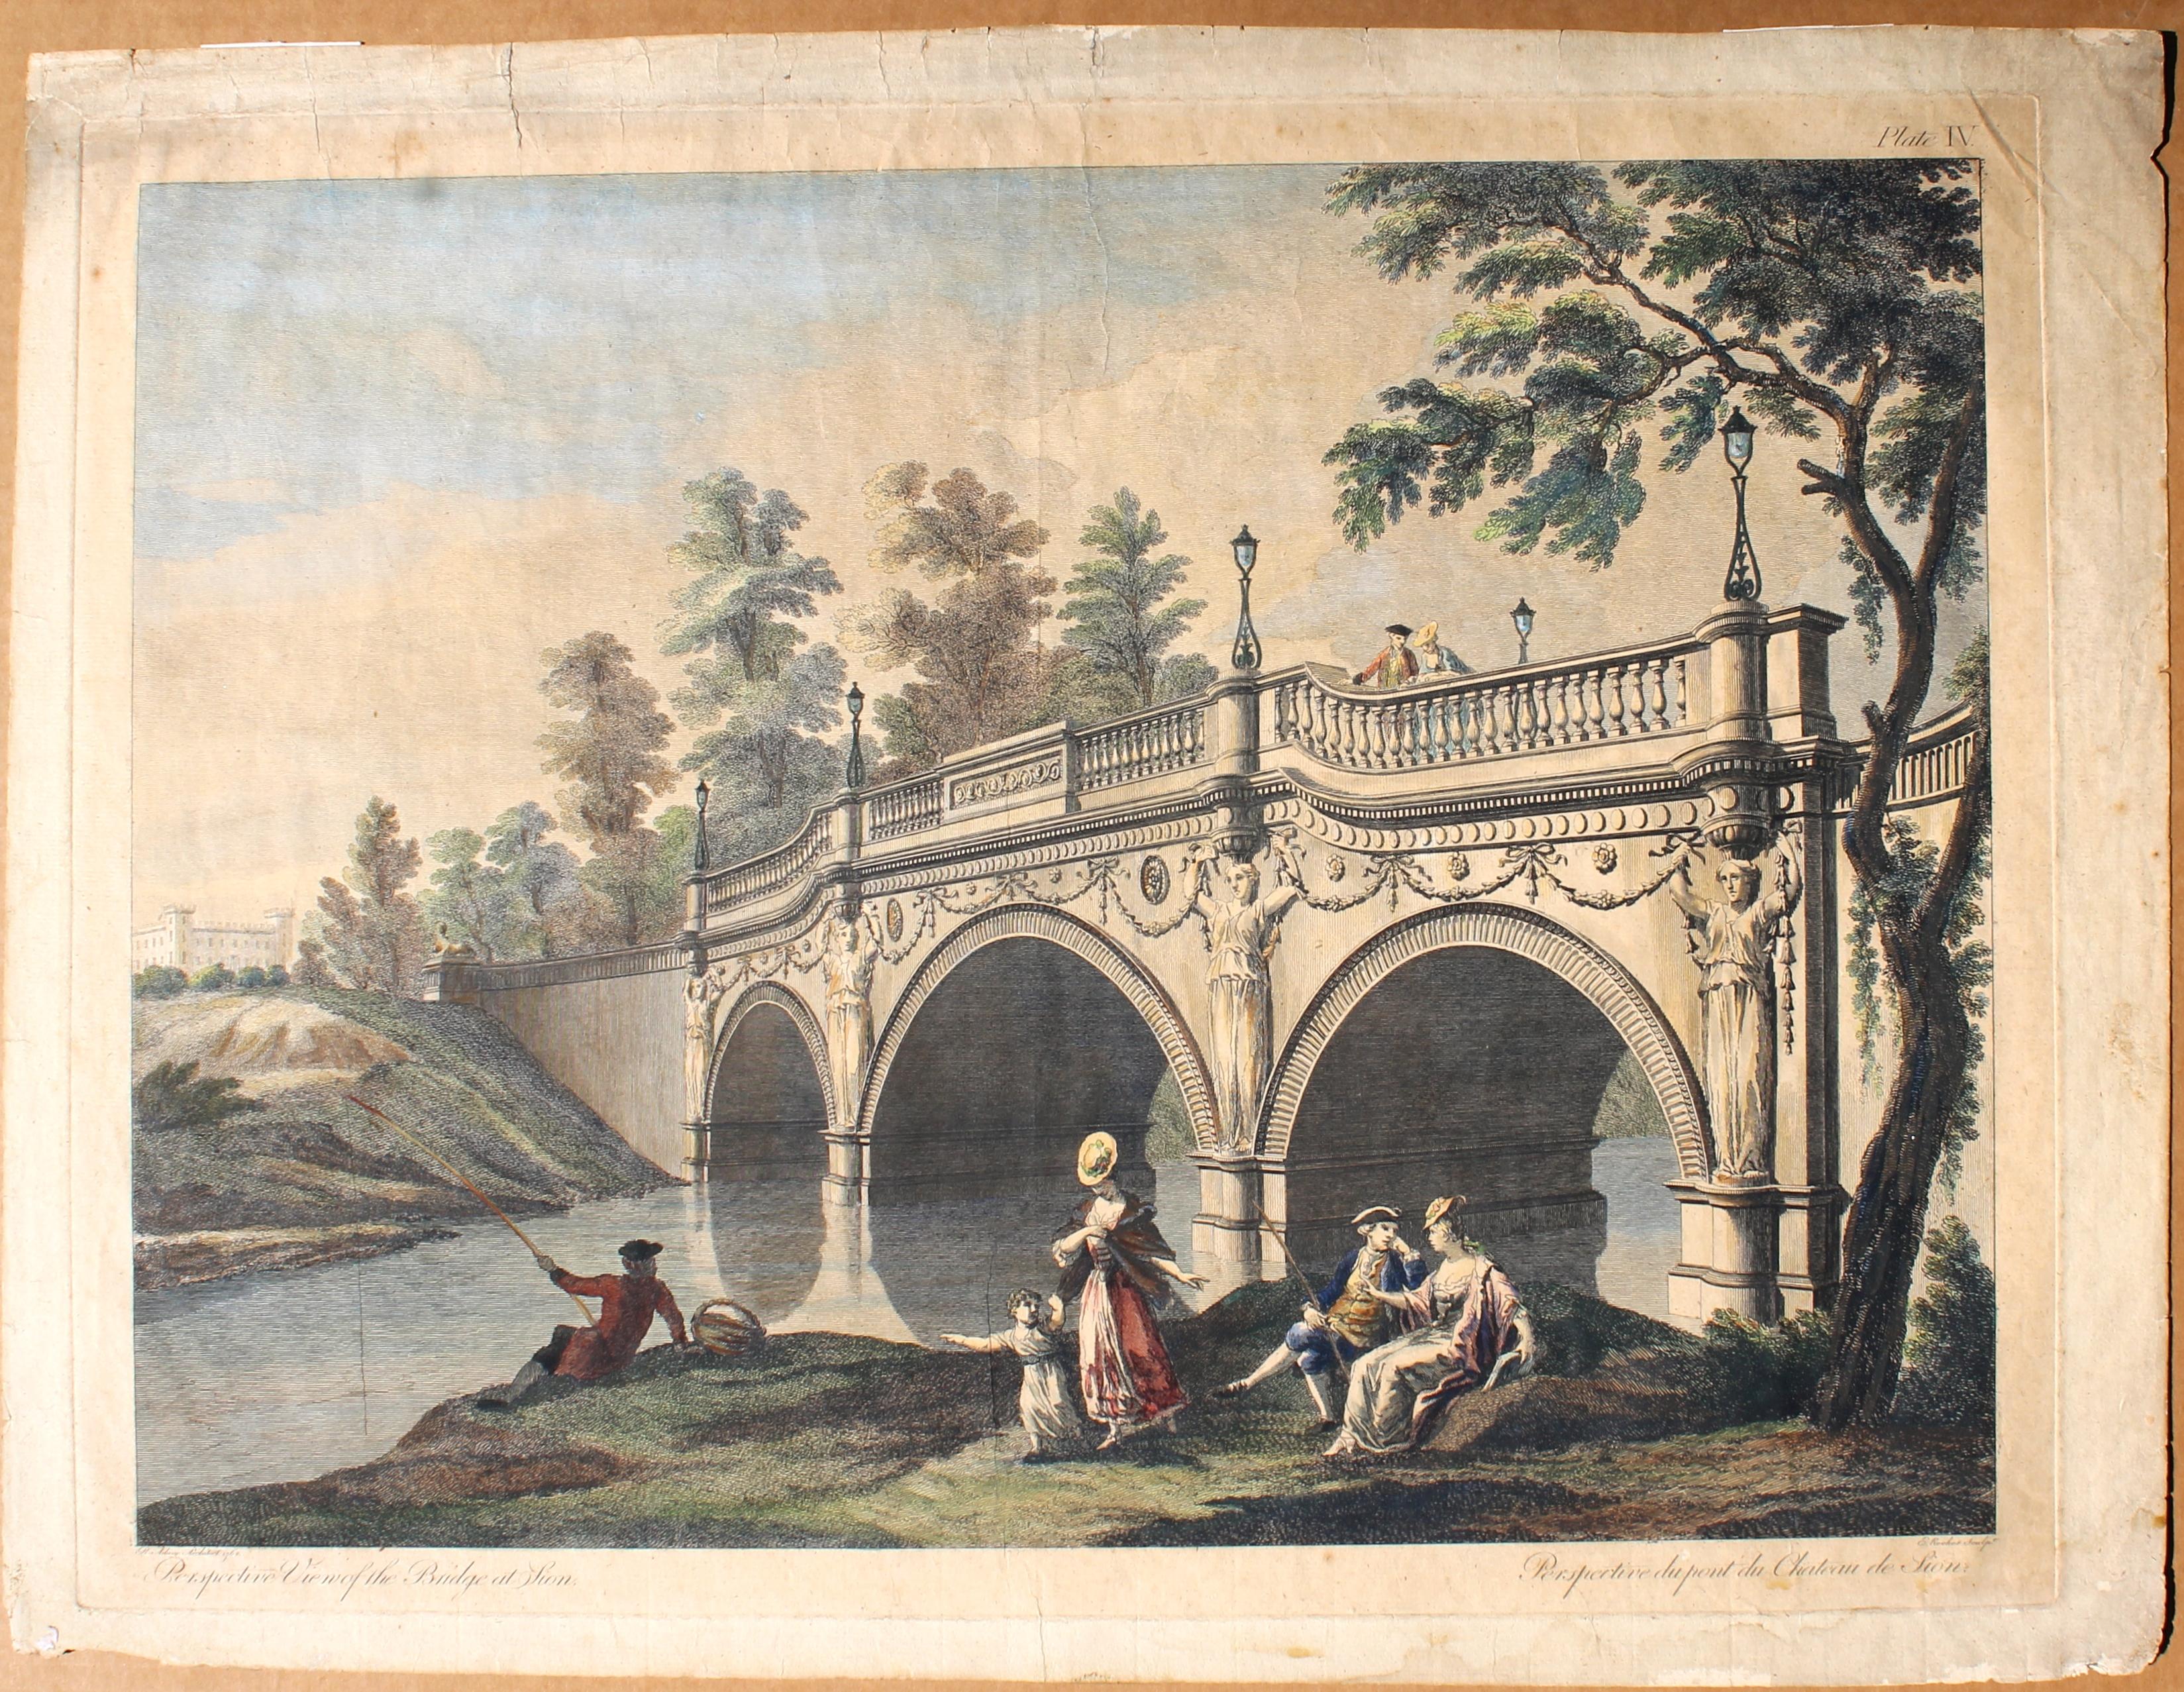 A rare period hand painted etching of the Robert Adam designed bridge at the Chataeu de Lion. Unframed. Paper size: 19.5